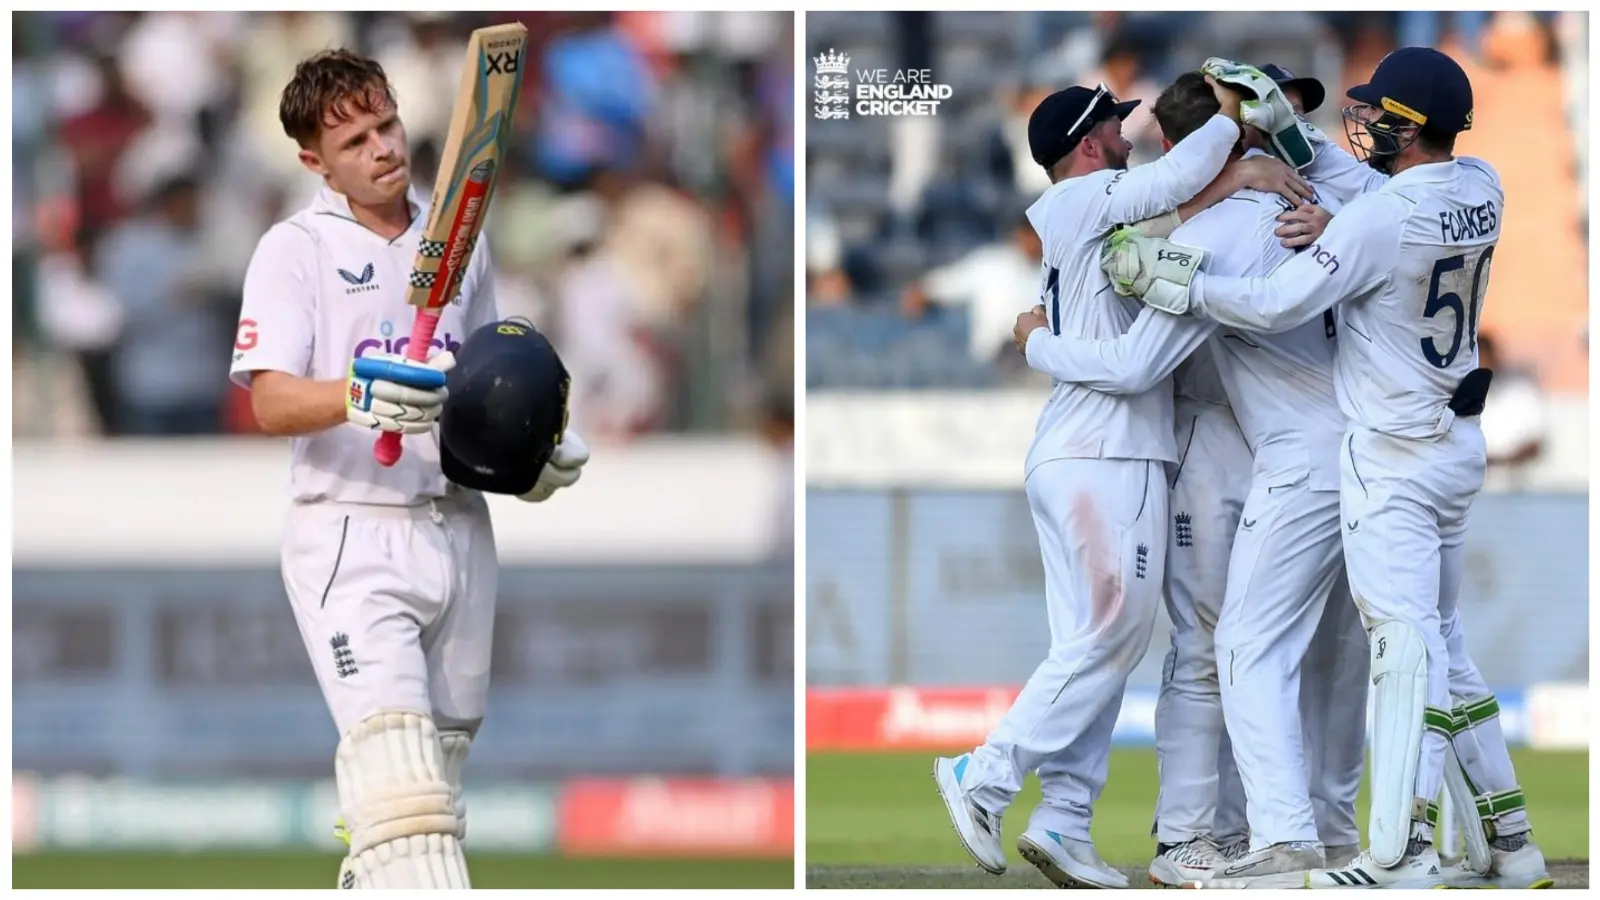 India lost the test in Hyderabad after strong performances from Pope and Hartley.